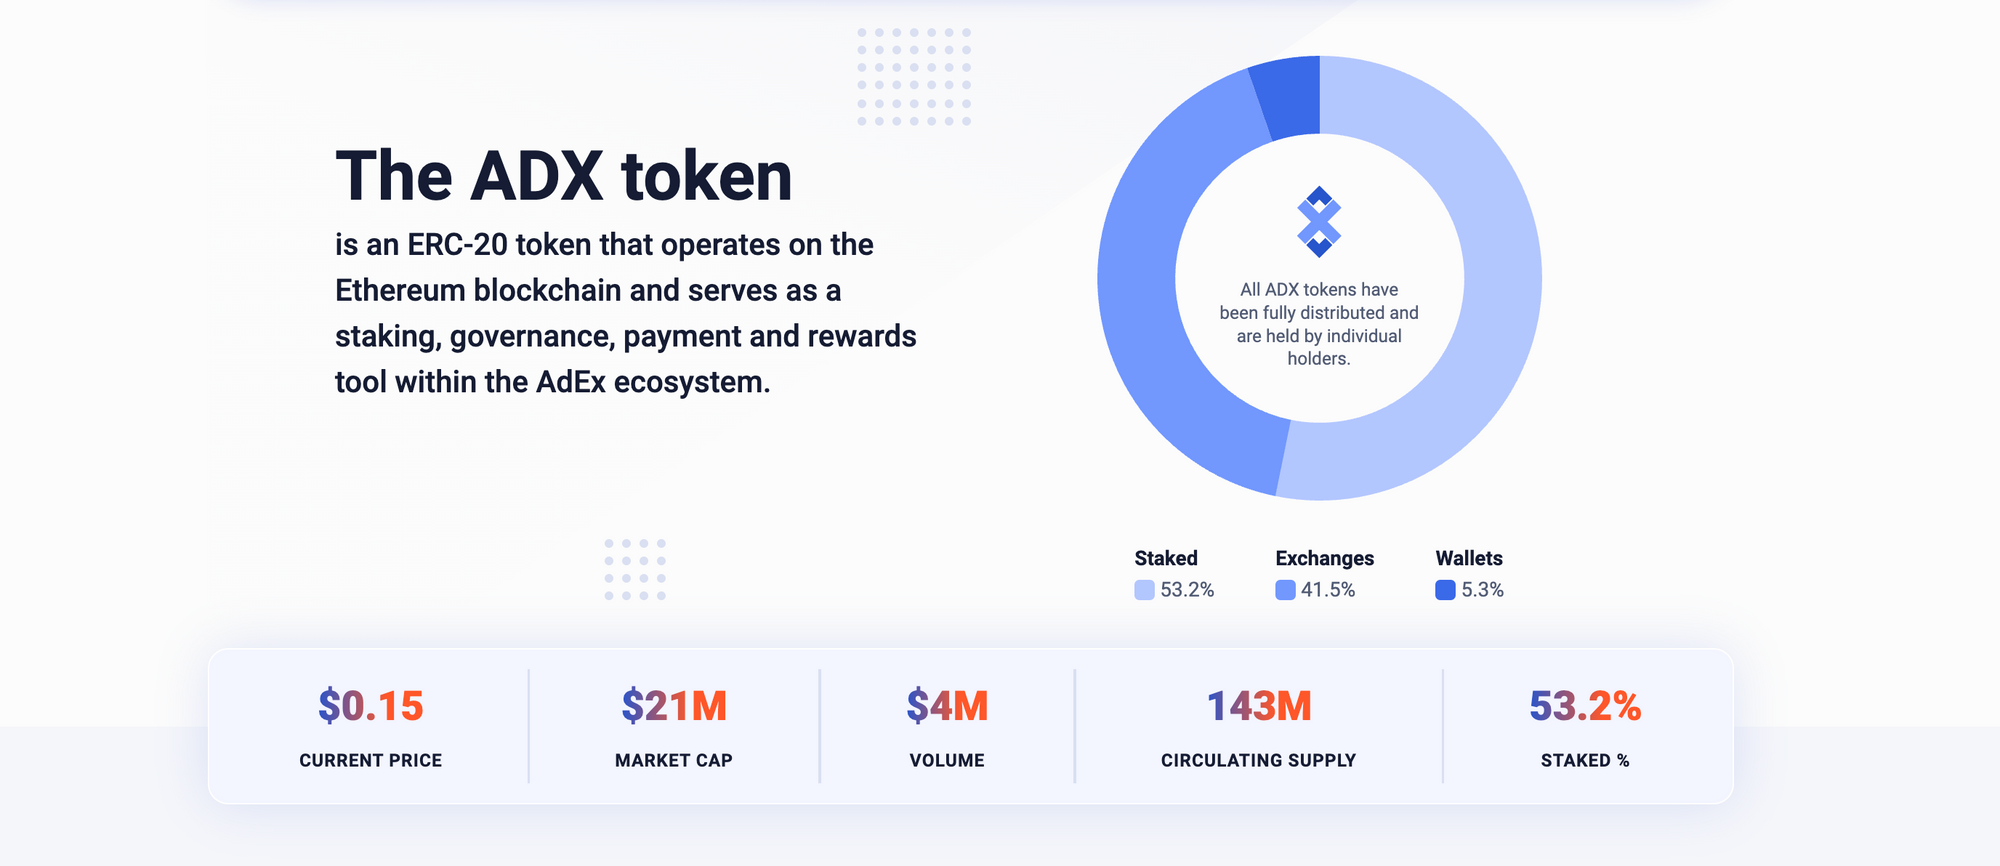 Origins and Utility of the ADX Token